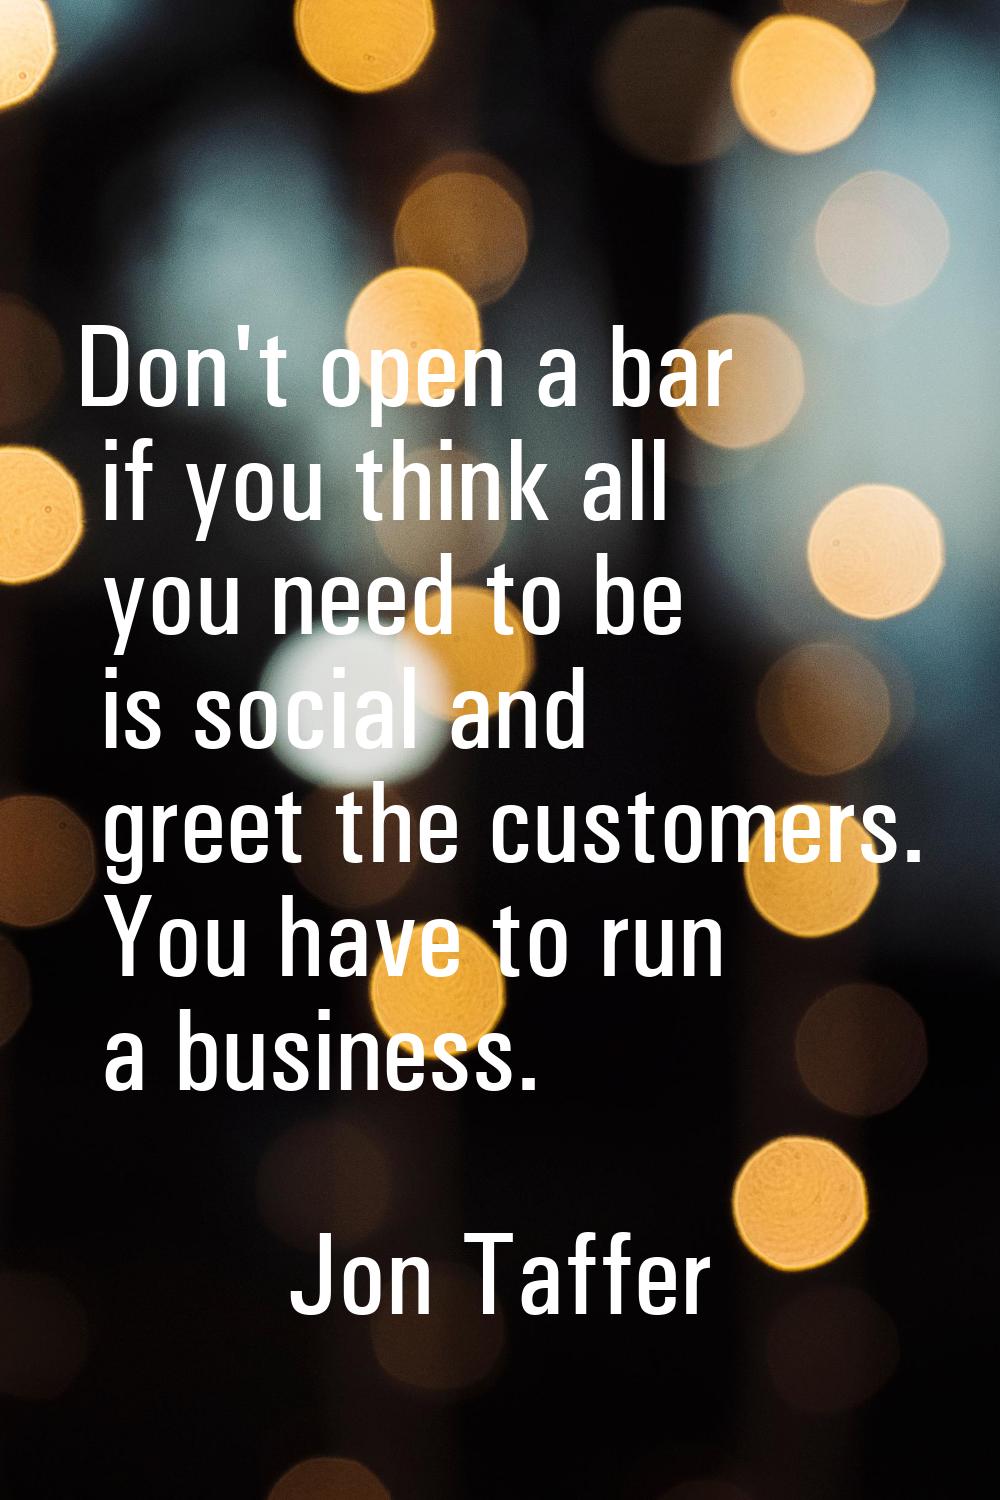 Don't open a bar if you think all you need to be is social and greet the customers. You have to run